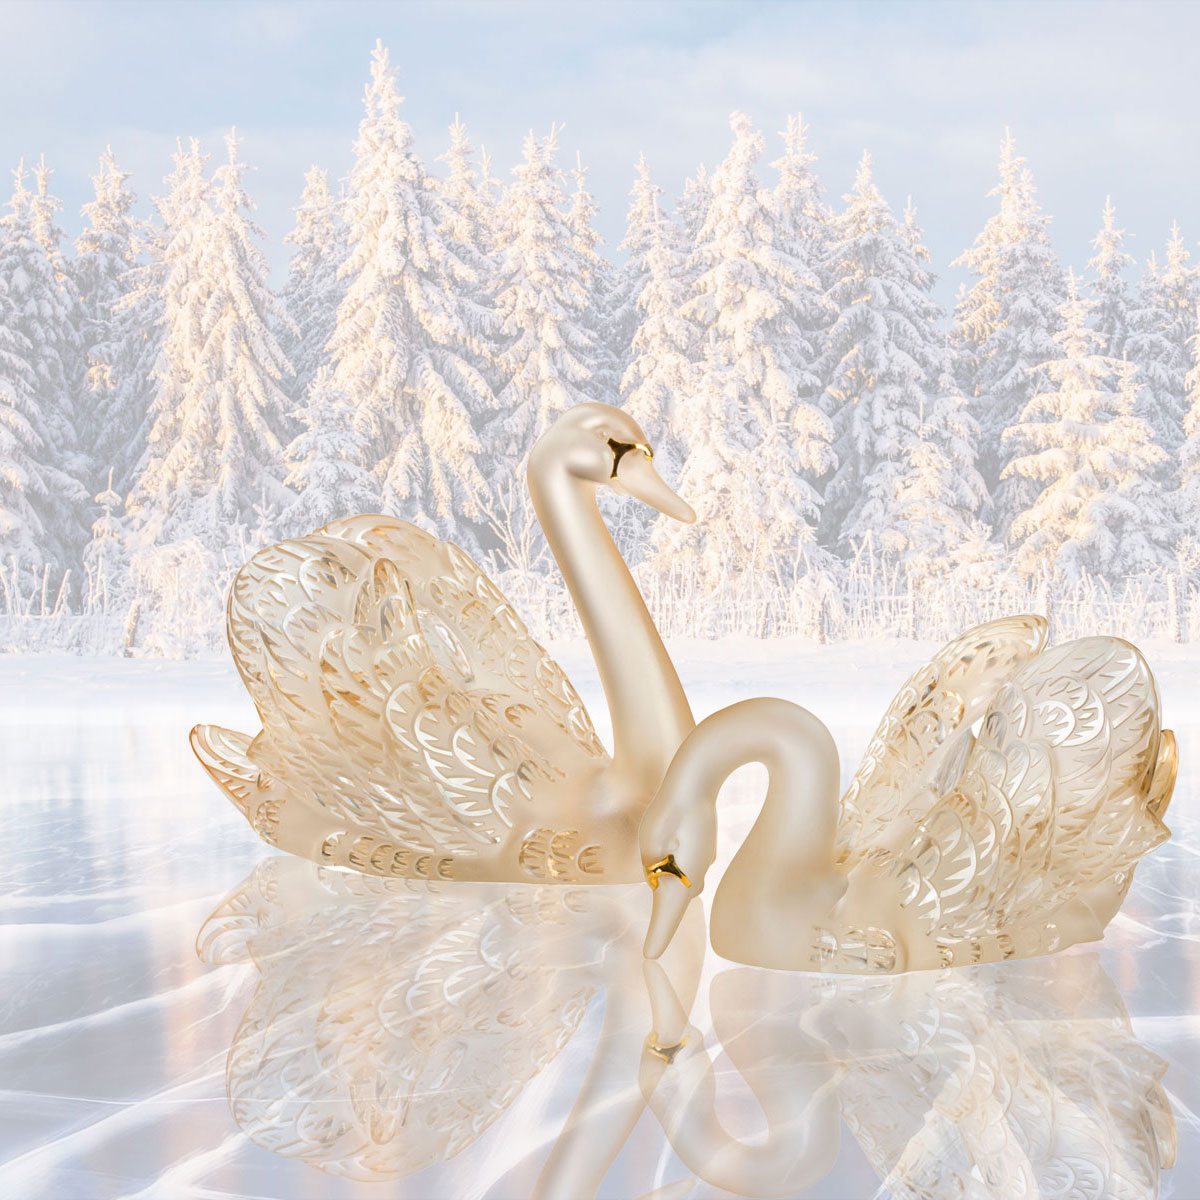 Lalique Swan Head Up Sculpture, Gold Luster